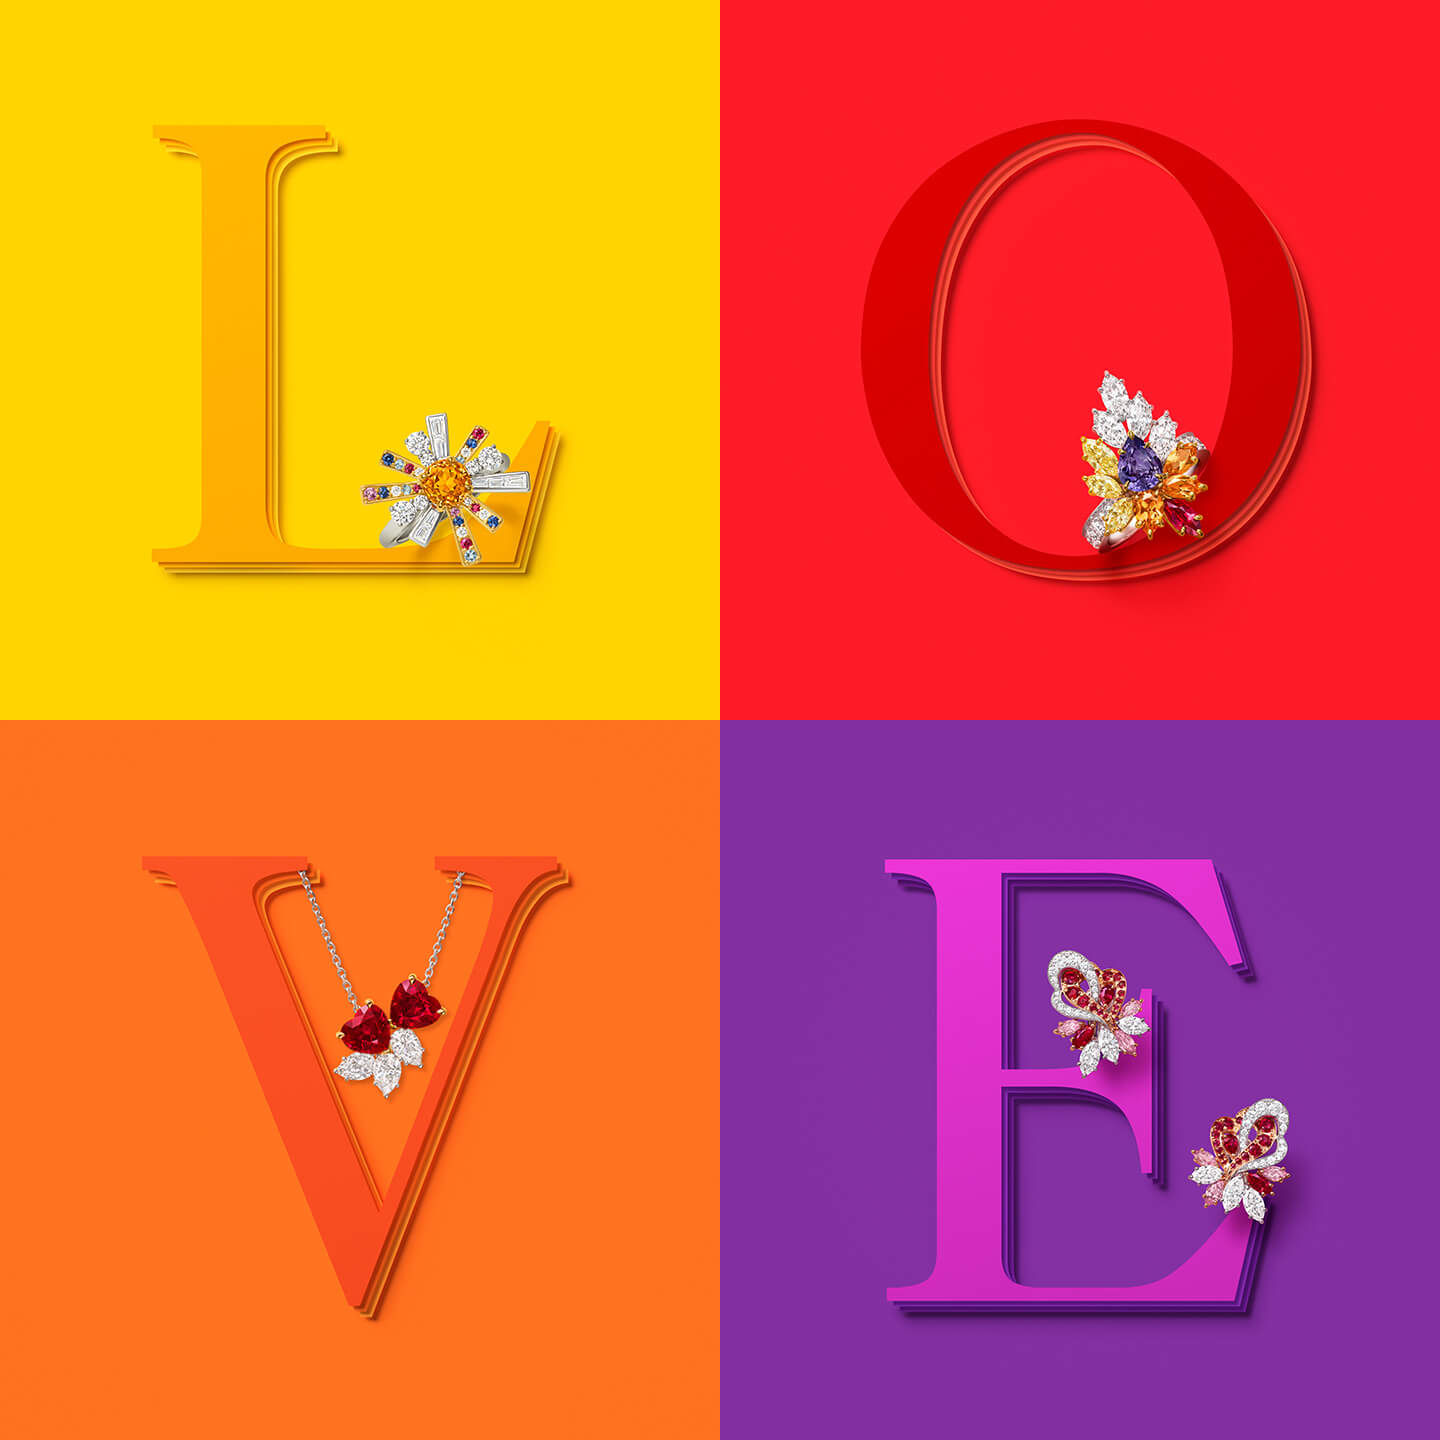 Harry Winston jewels accompanying letters L, O, V, E on a colorful background